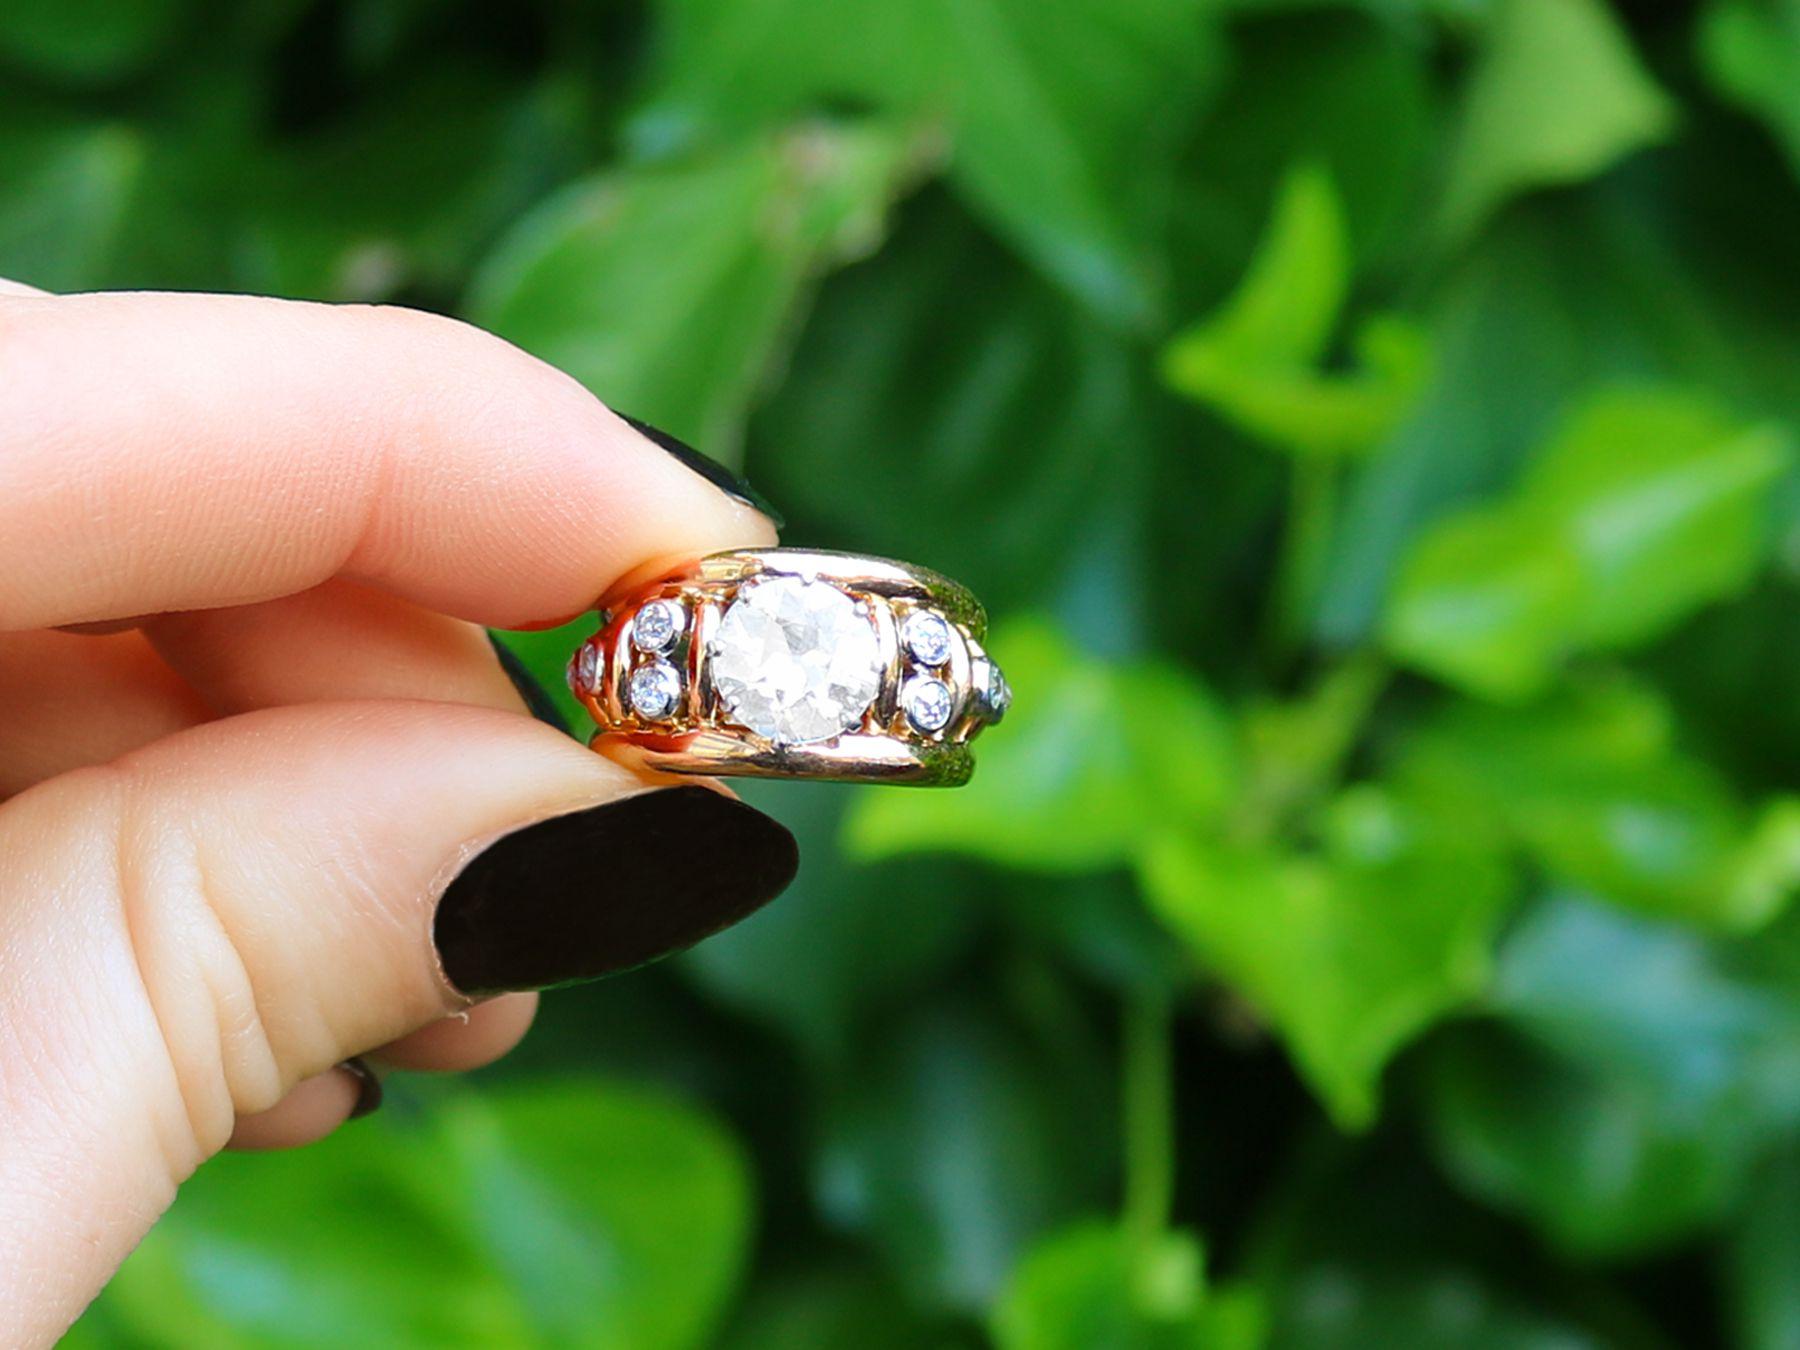 A stunning antique French 2 carat diamond and 18k yellow gold, platinum set dress ring; part of our diverse antique jewelry and estate jewelry collections.

This stunning, fine and impressive antique French diamond and gold ring has been crafted in